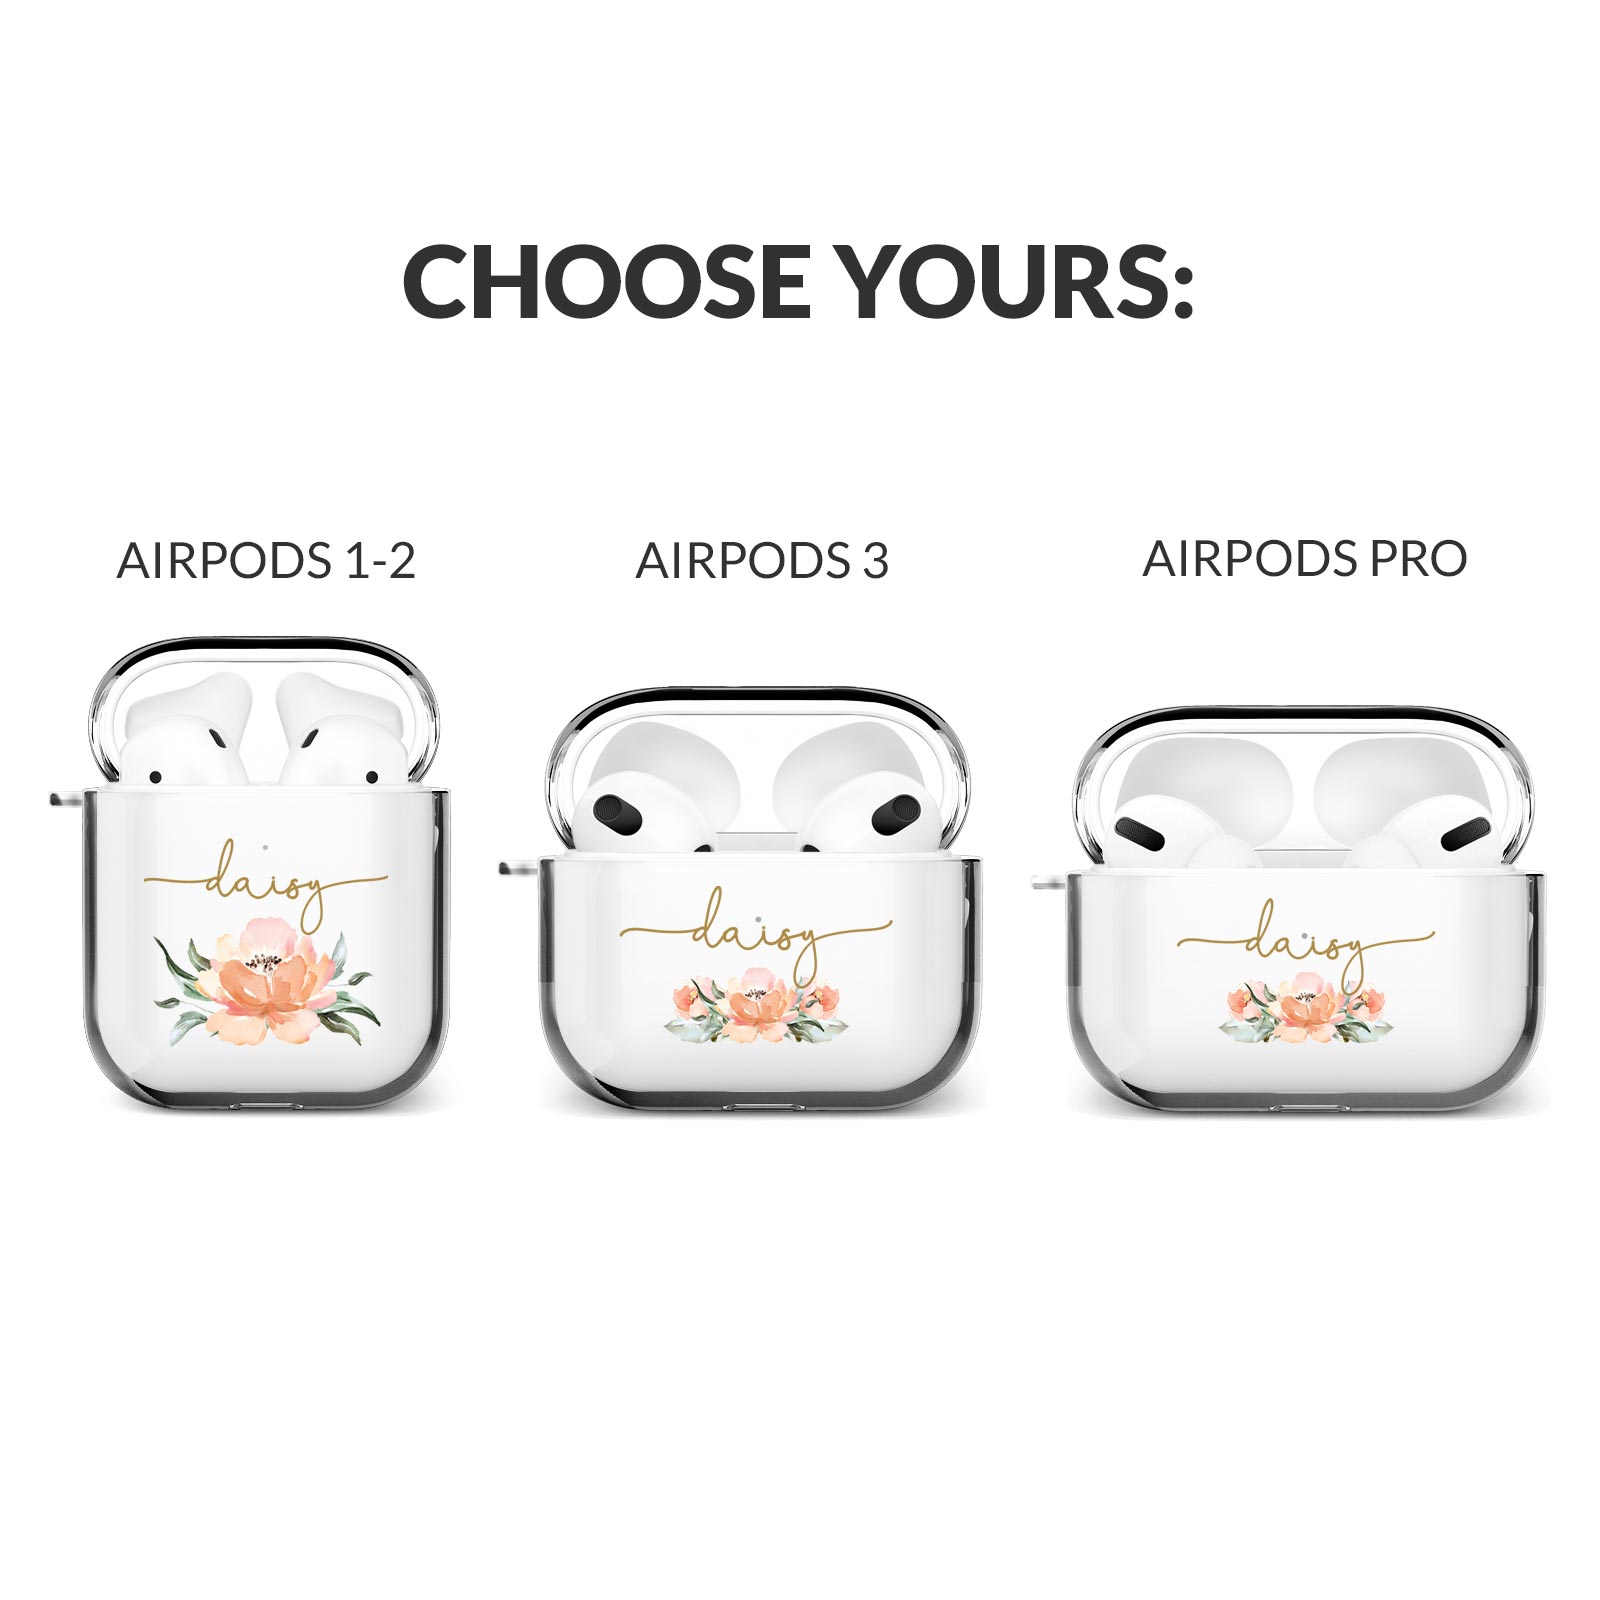 Buy Nike Shoes Case For AirPods Cases (1, 2, 3, Pro) - Airpod